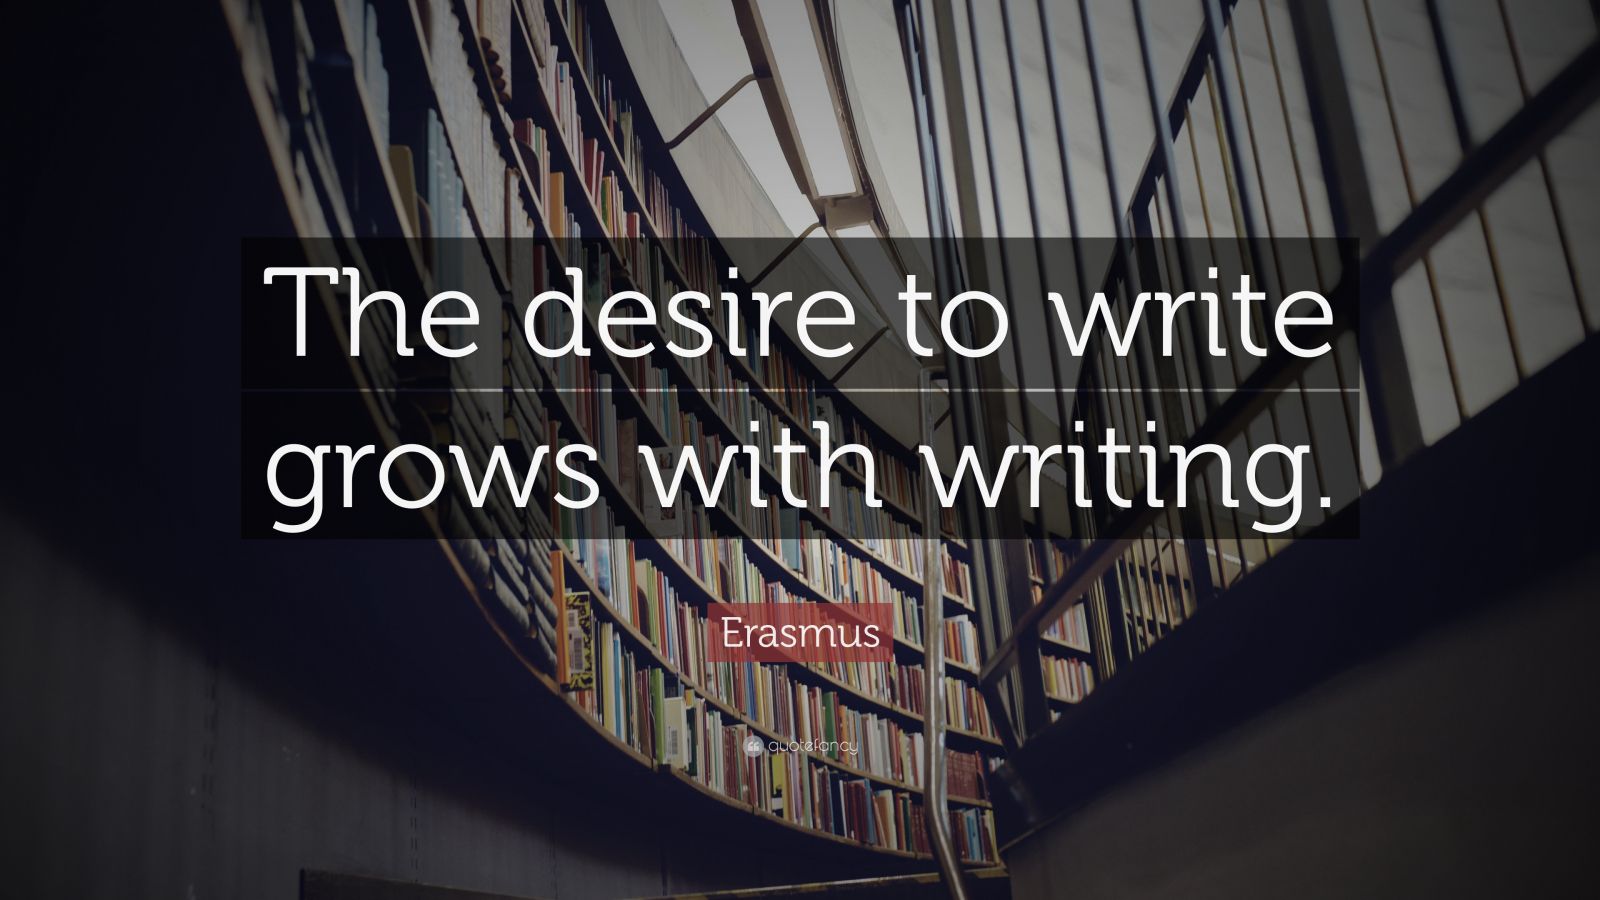 Erasmus Quote: “The desire to write grows with writing.”